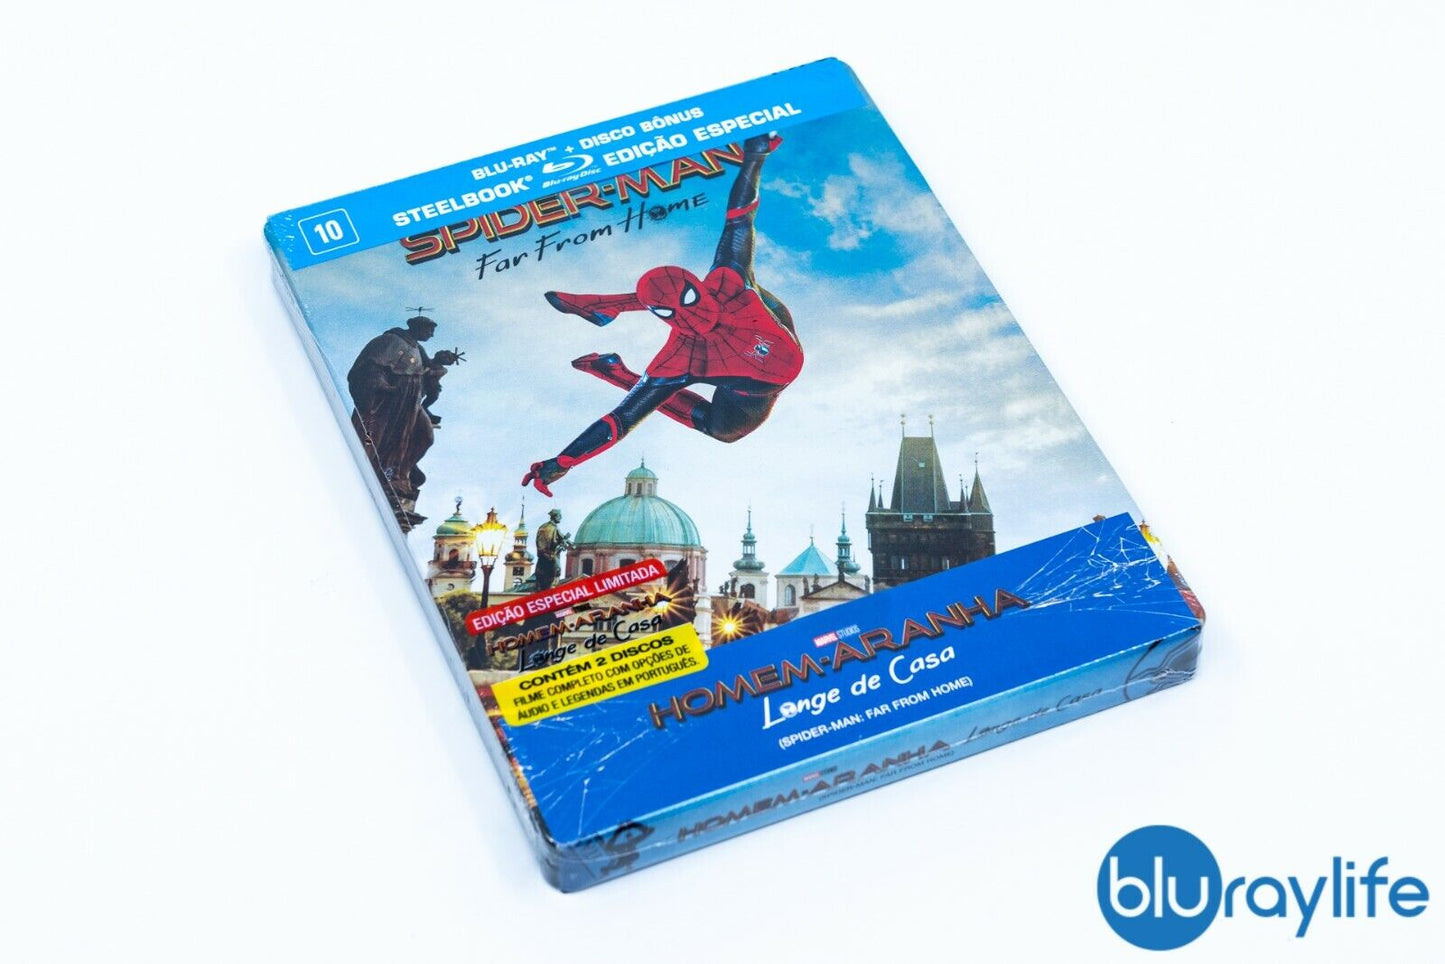 Spider-Man: Far From Home Blu-ray Steelbook Amazon Brazil Exclusive